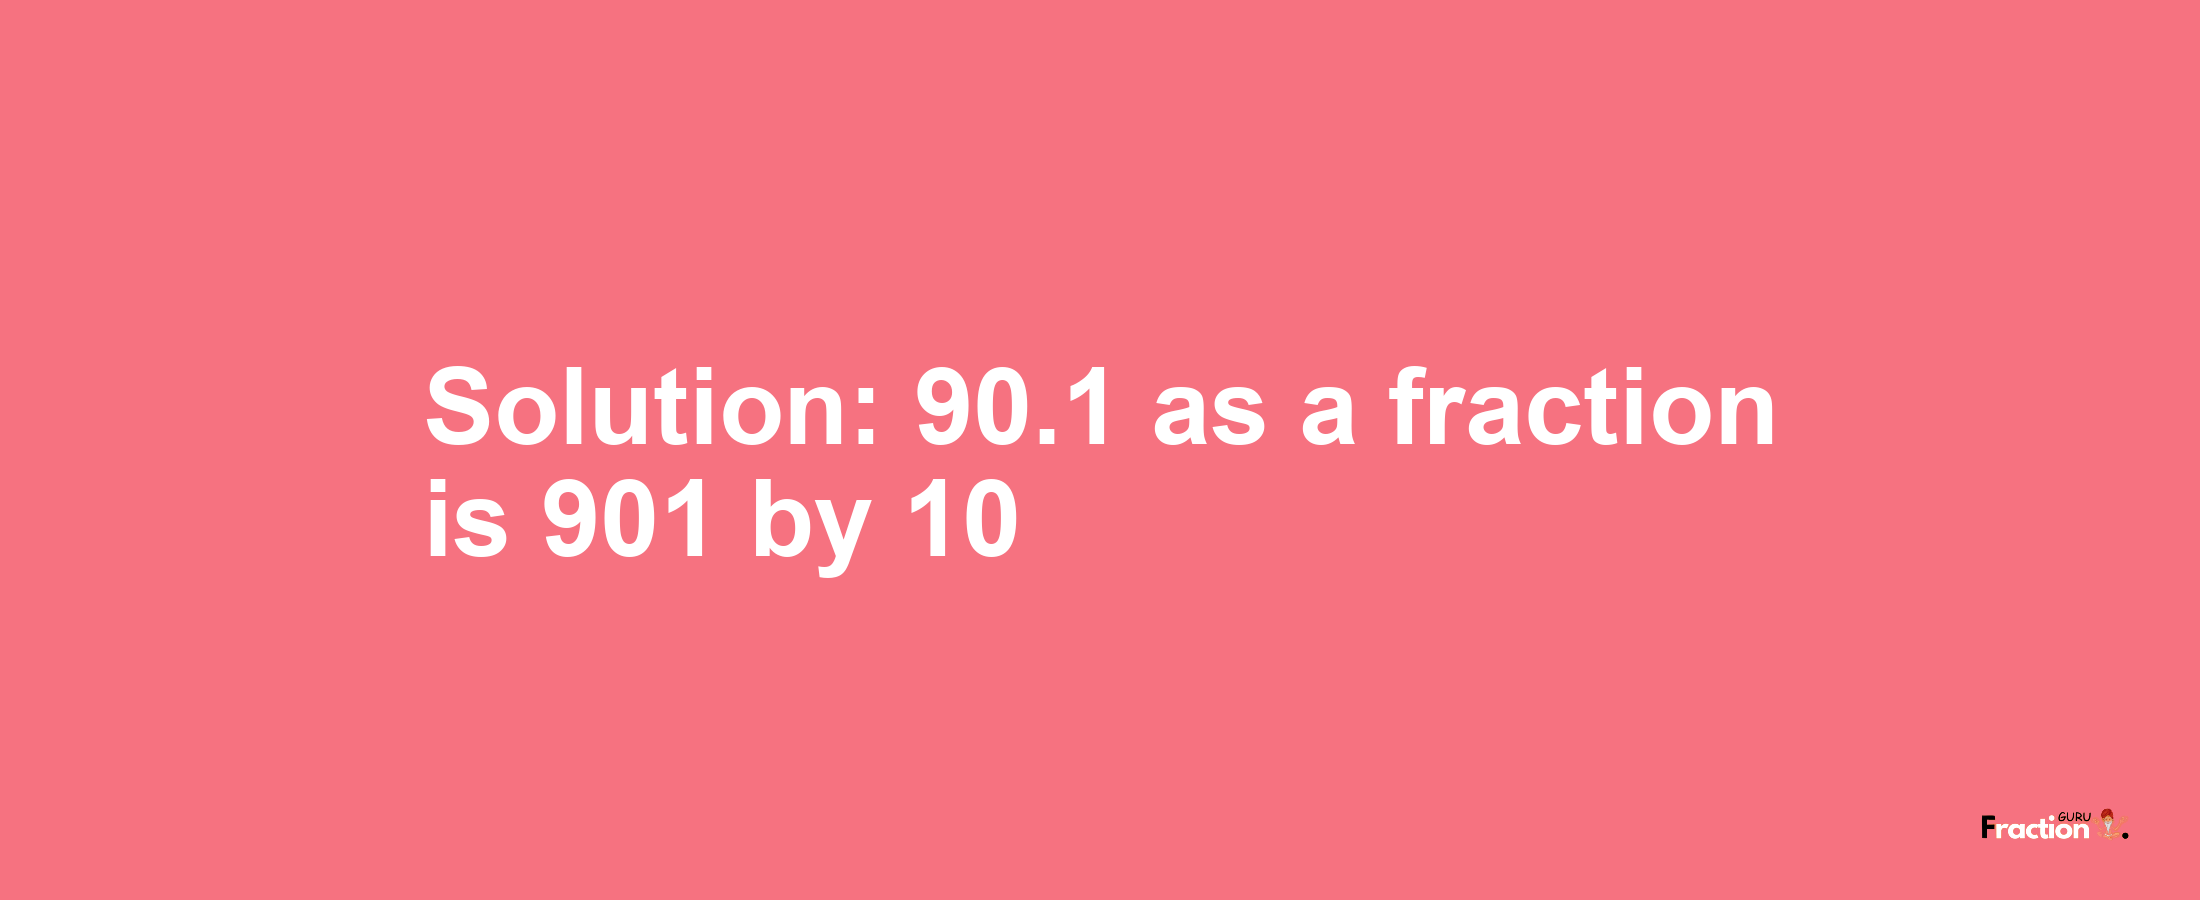 Solution:90.1 as a fraction is 901/10